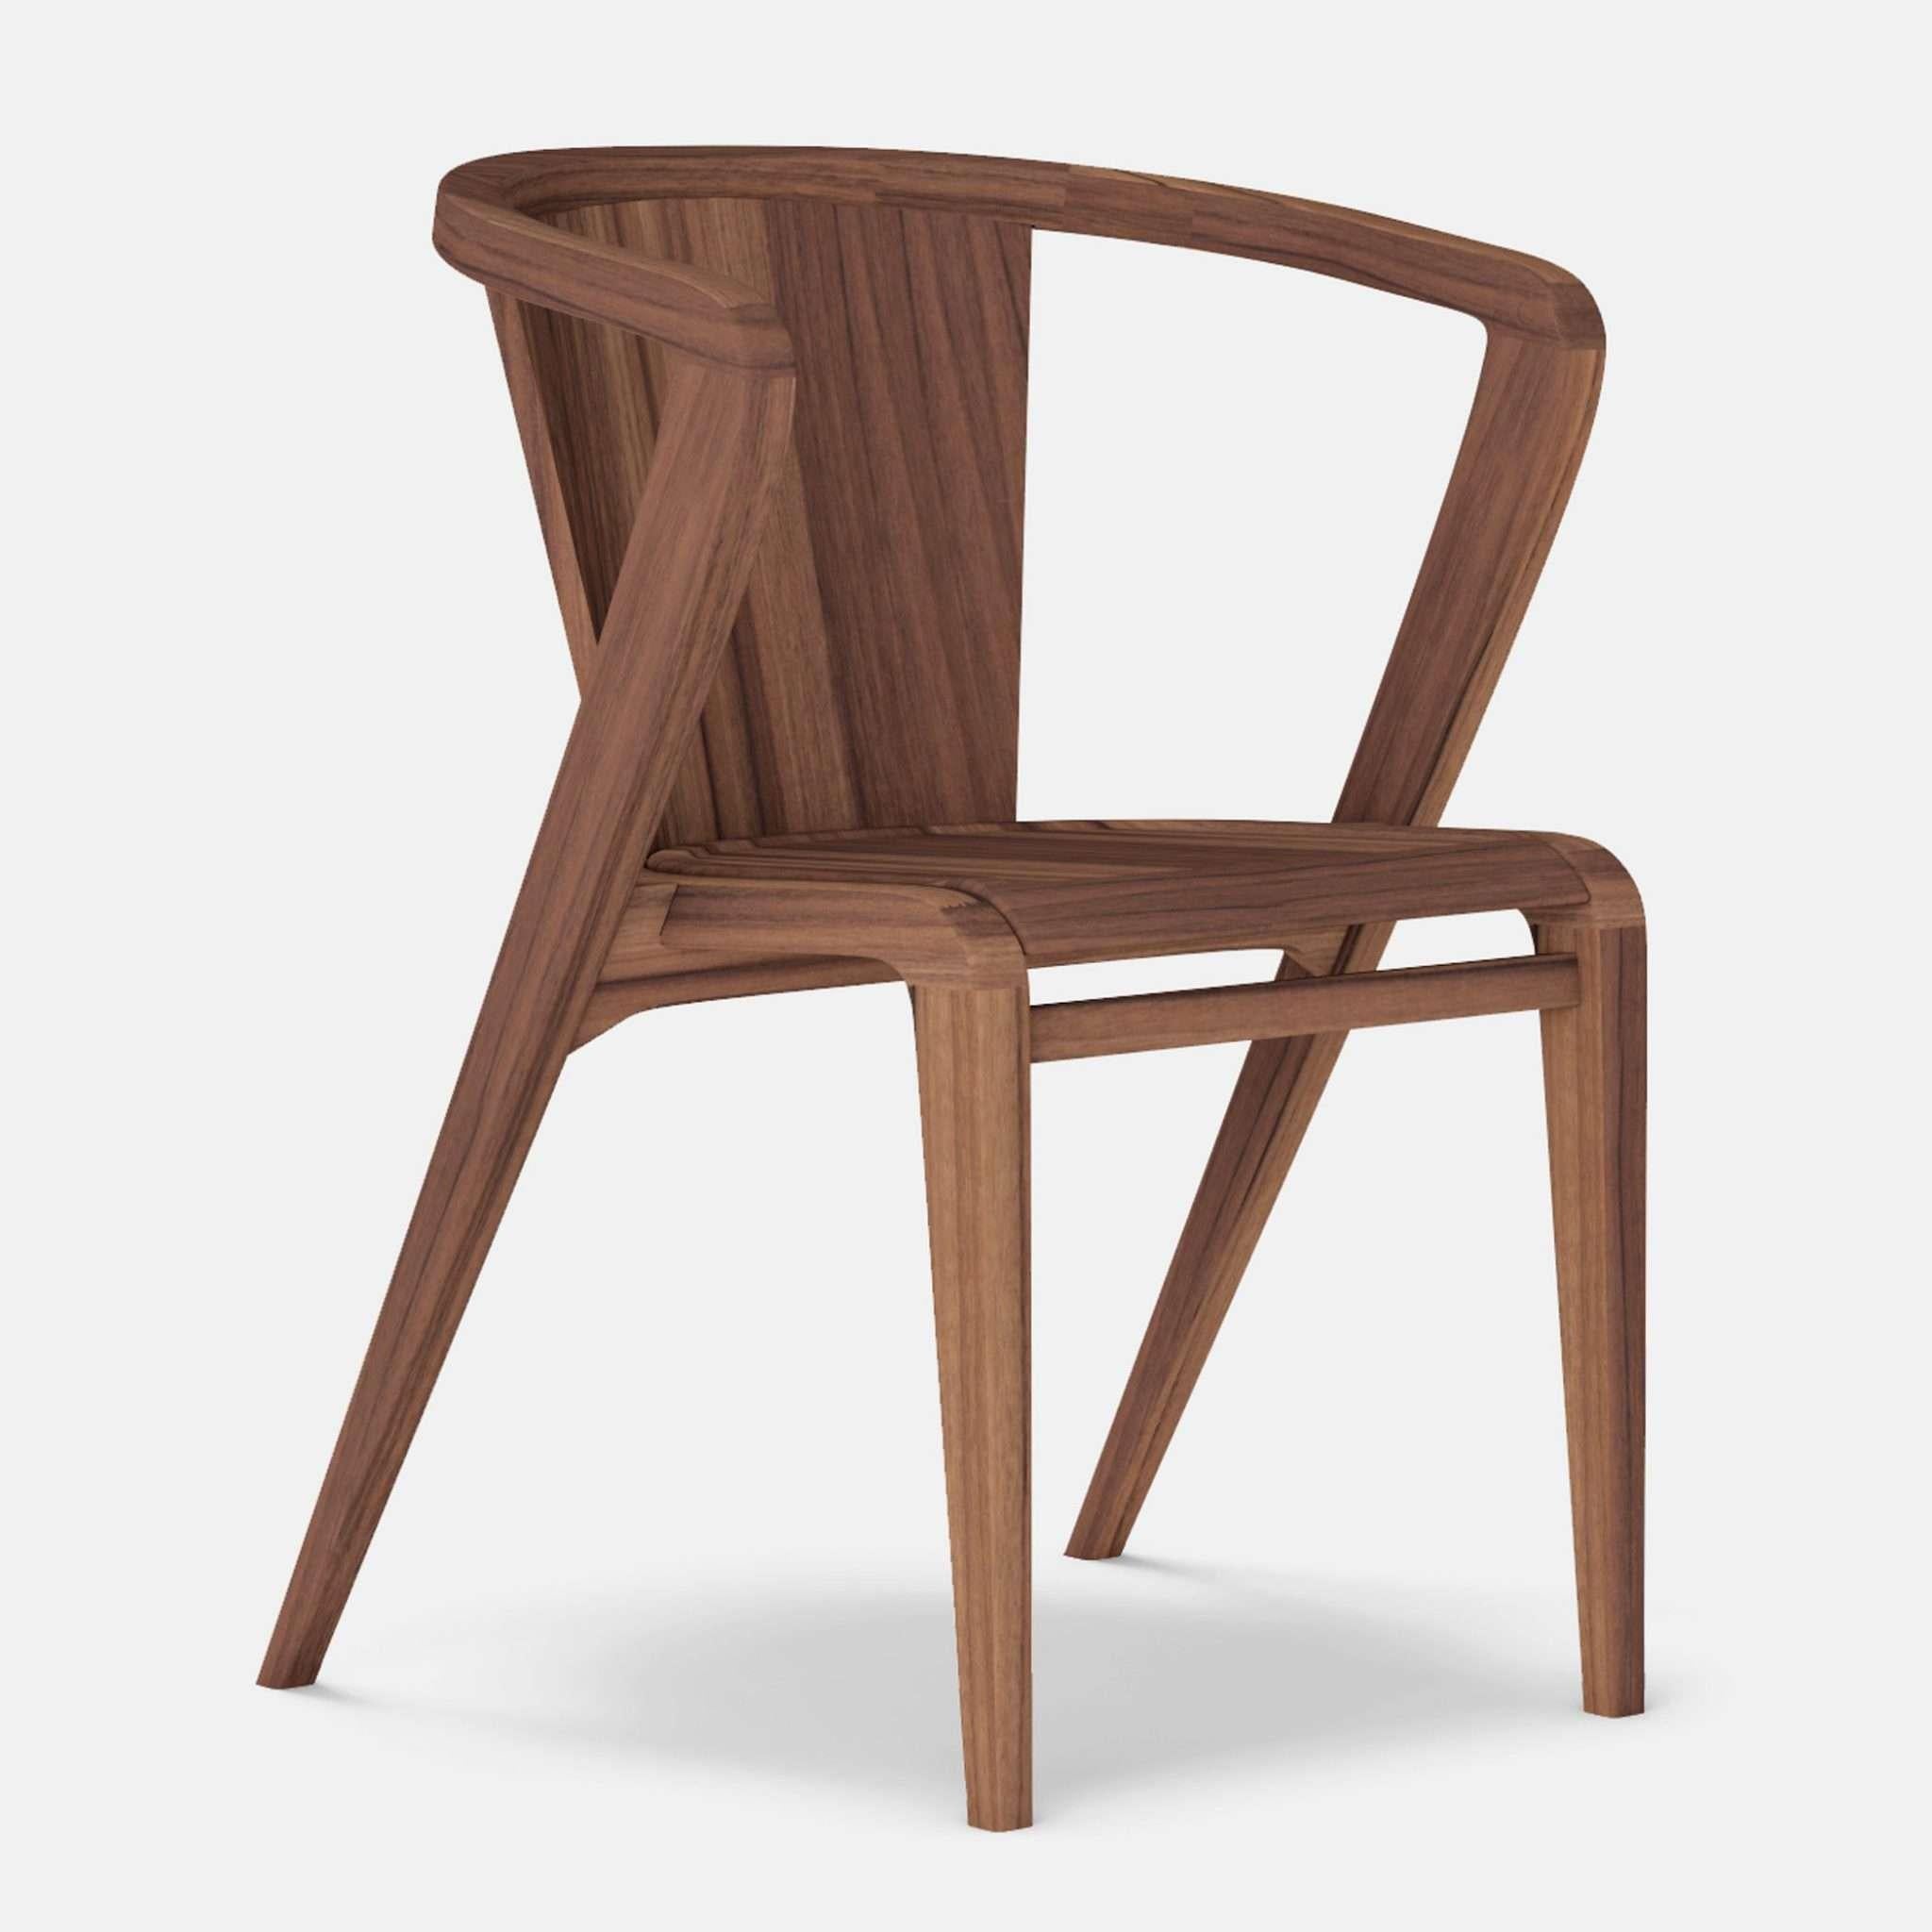 Walnut Portuguese roots chair by Alexandre Caldas
Dimensions: W 40 x D 39 x H 73 cm
Materials: Walnut 

Portuguese Roots chair, was inspired by its original model from 1950, created by Gonçalo Rodrigues dos Santos and designed today by Alexandre